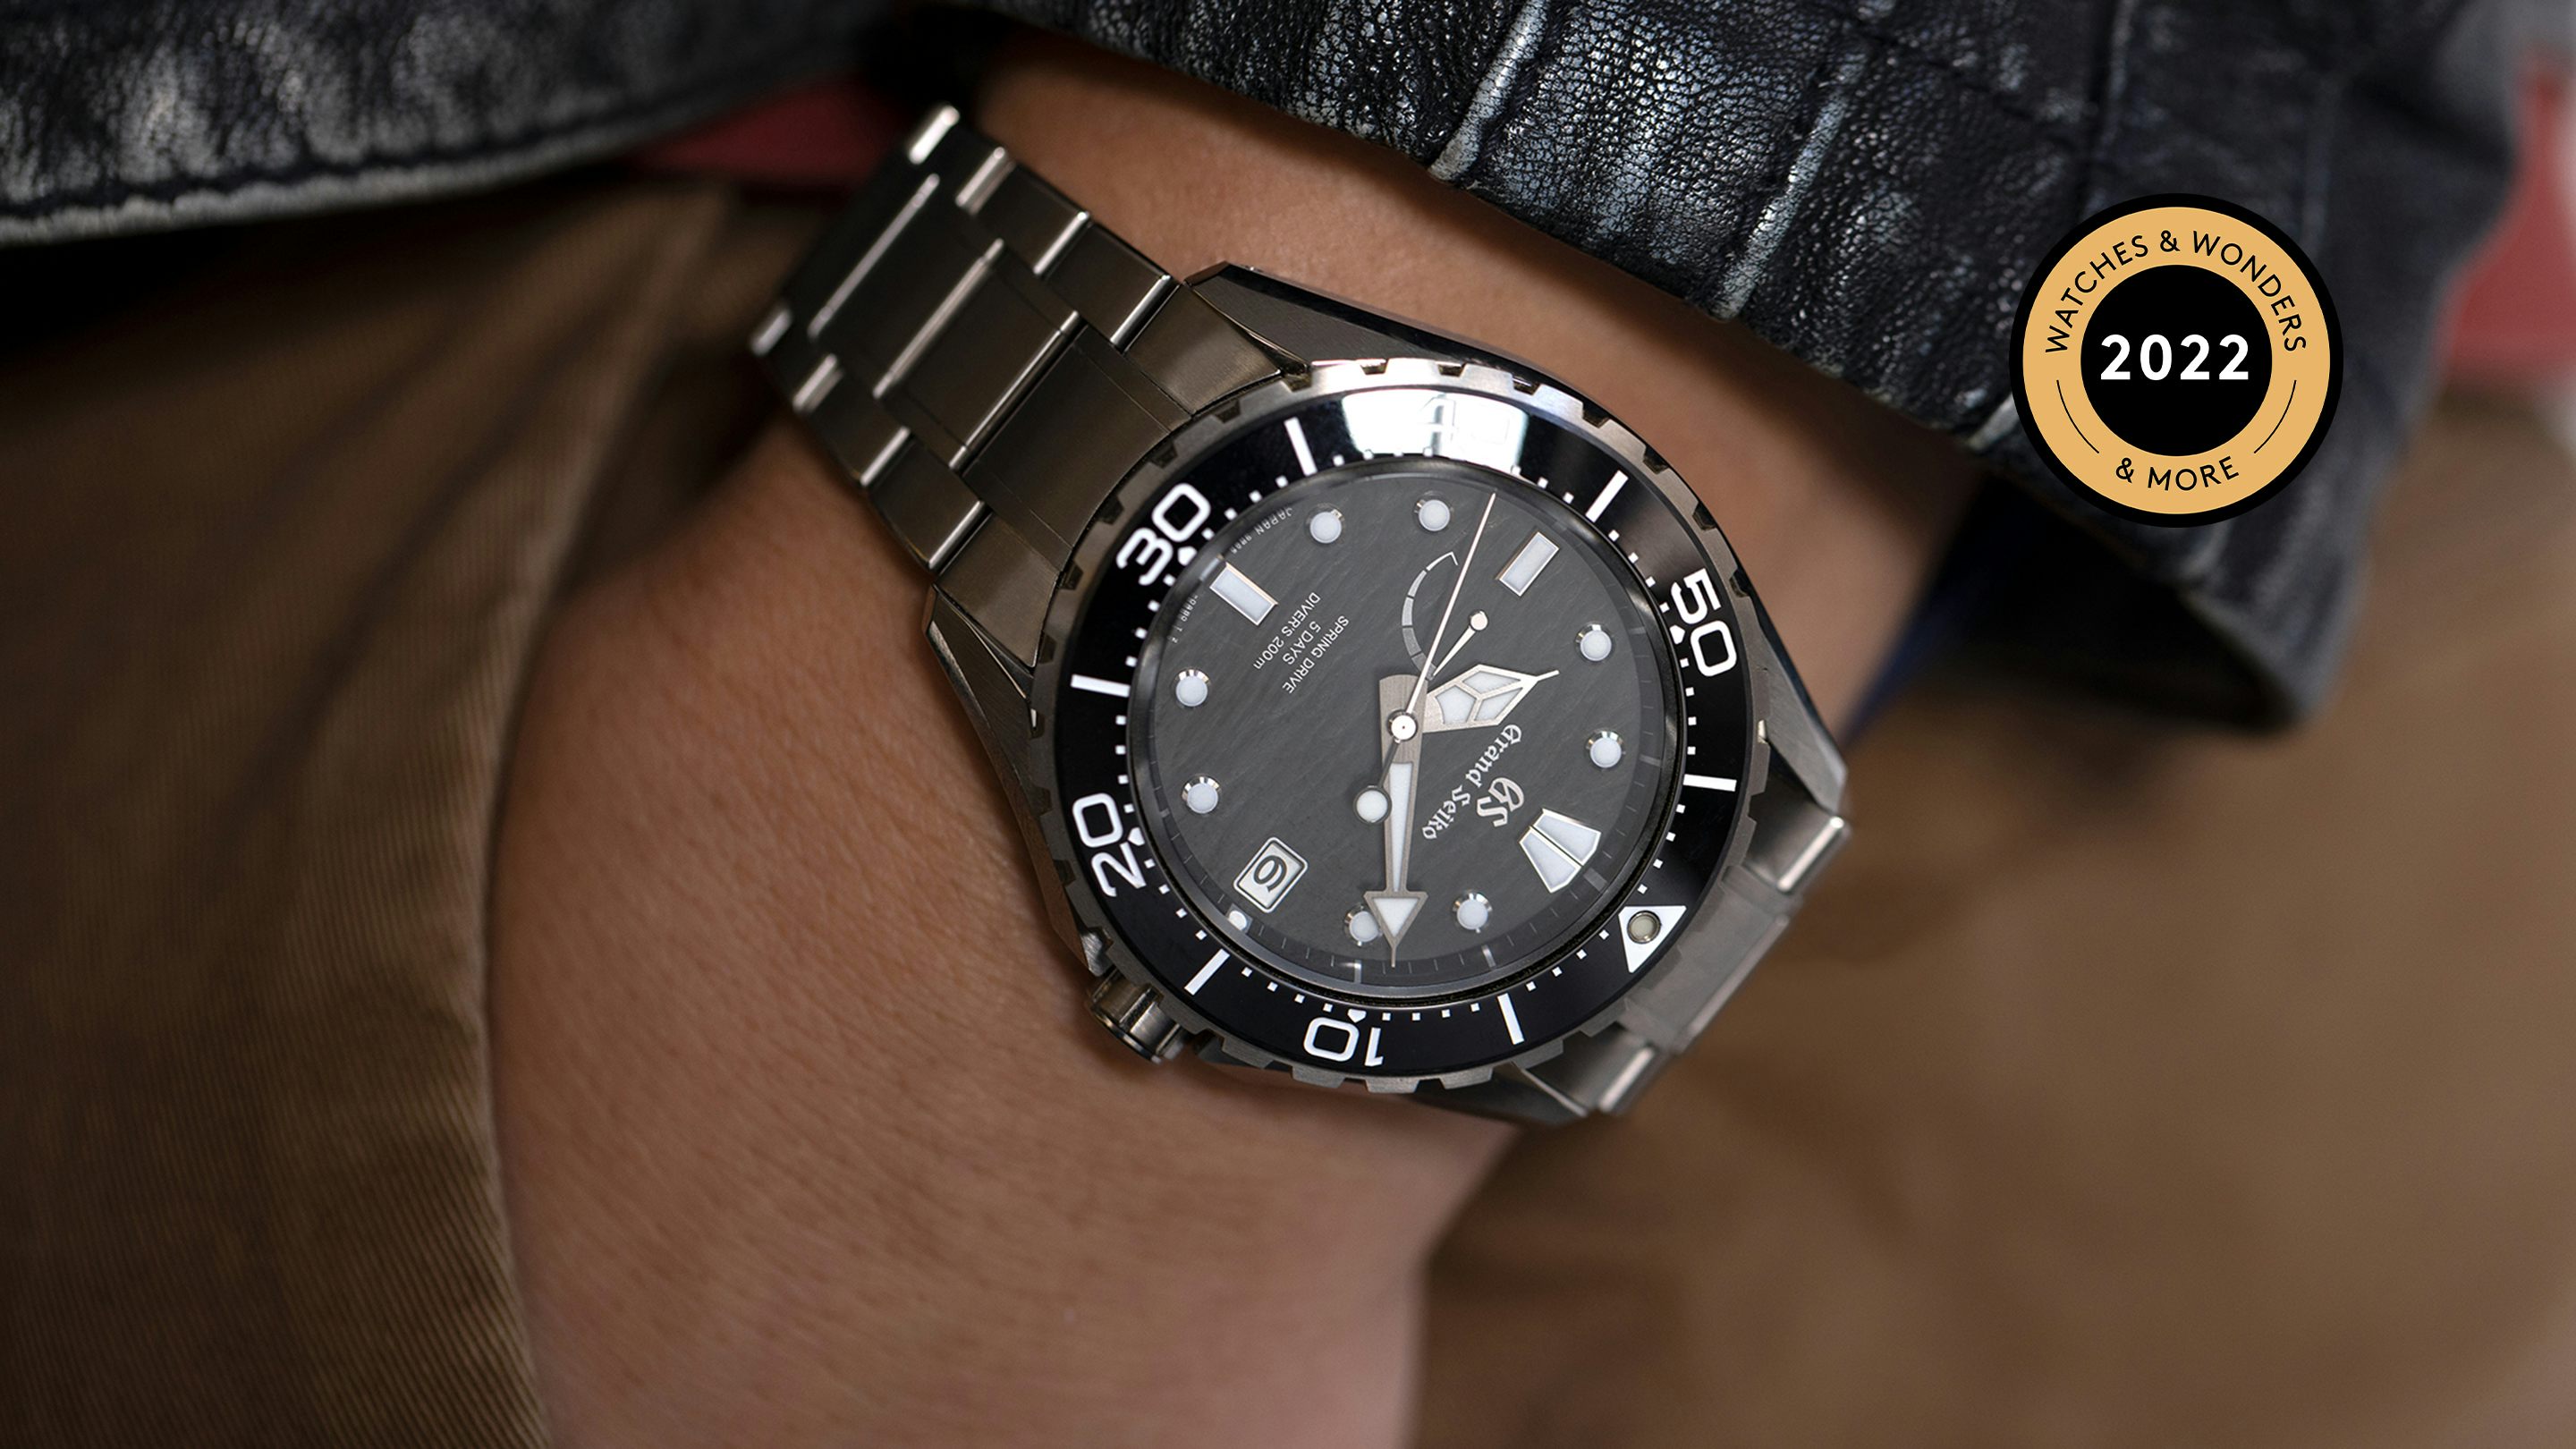 Powered by a new three-day movement, a mechanical GMT diver's watch joins  the Seiko Prospex collection for the first time.